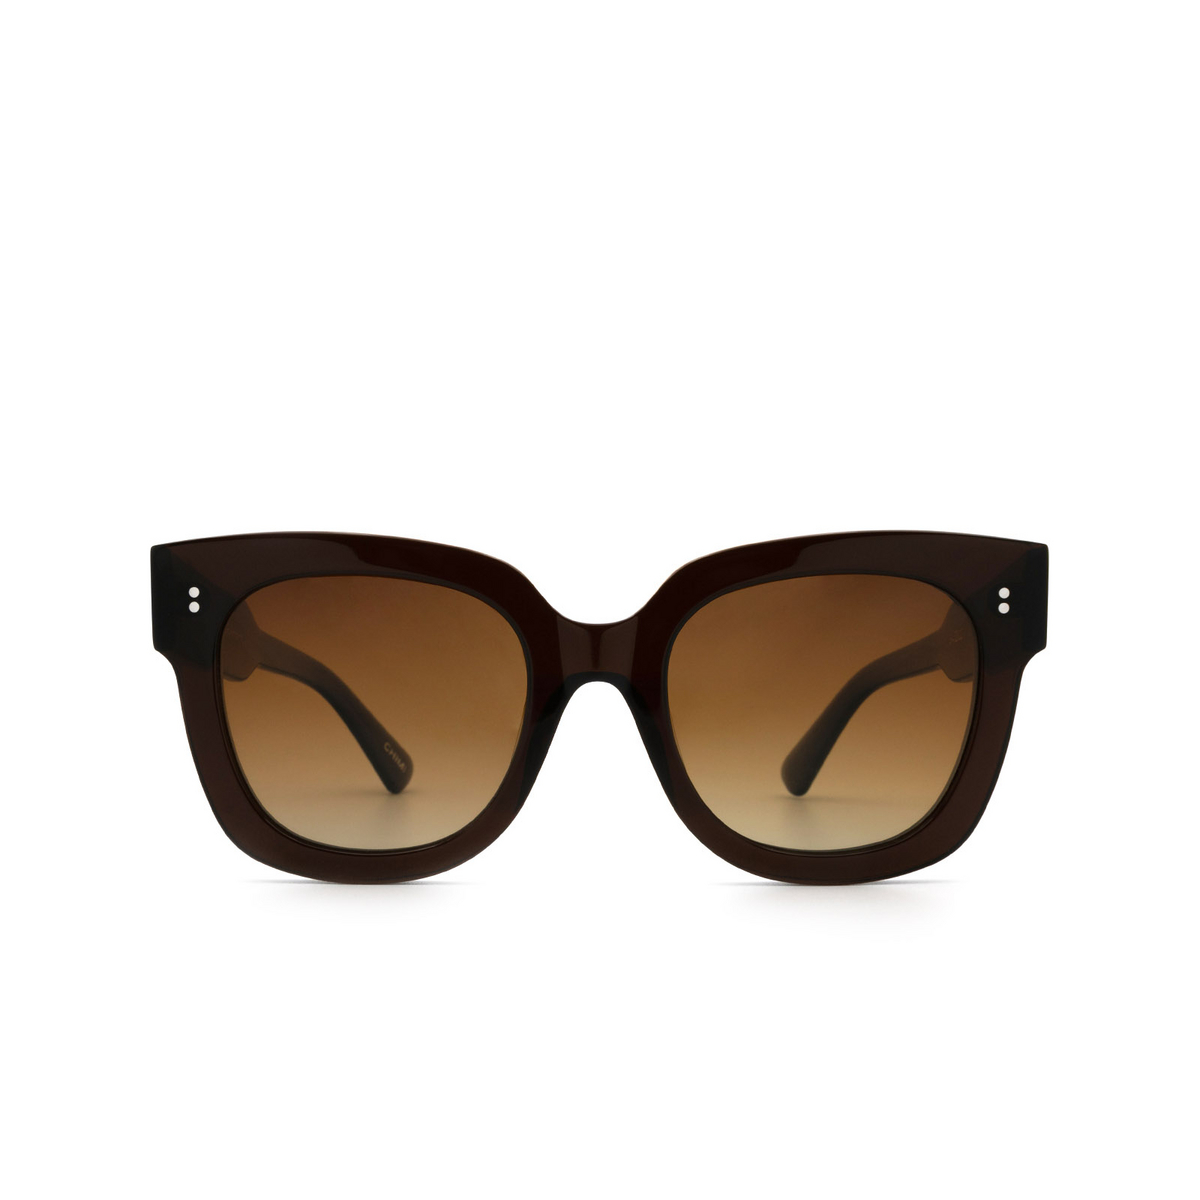 Chimi® Square Sunglasses: 08 color Brown - front view.